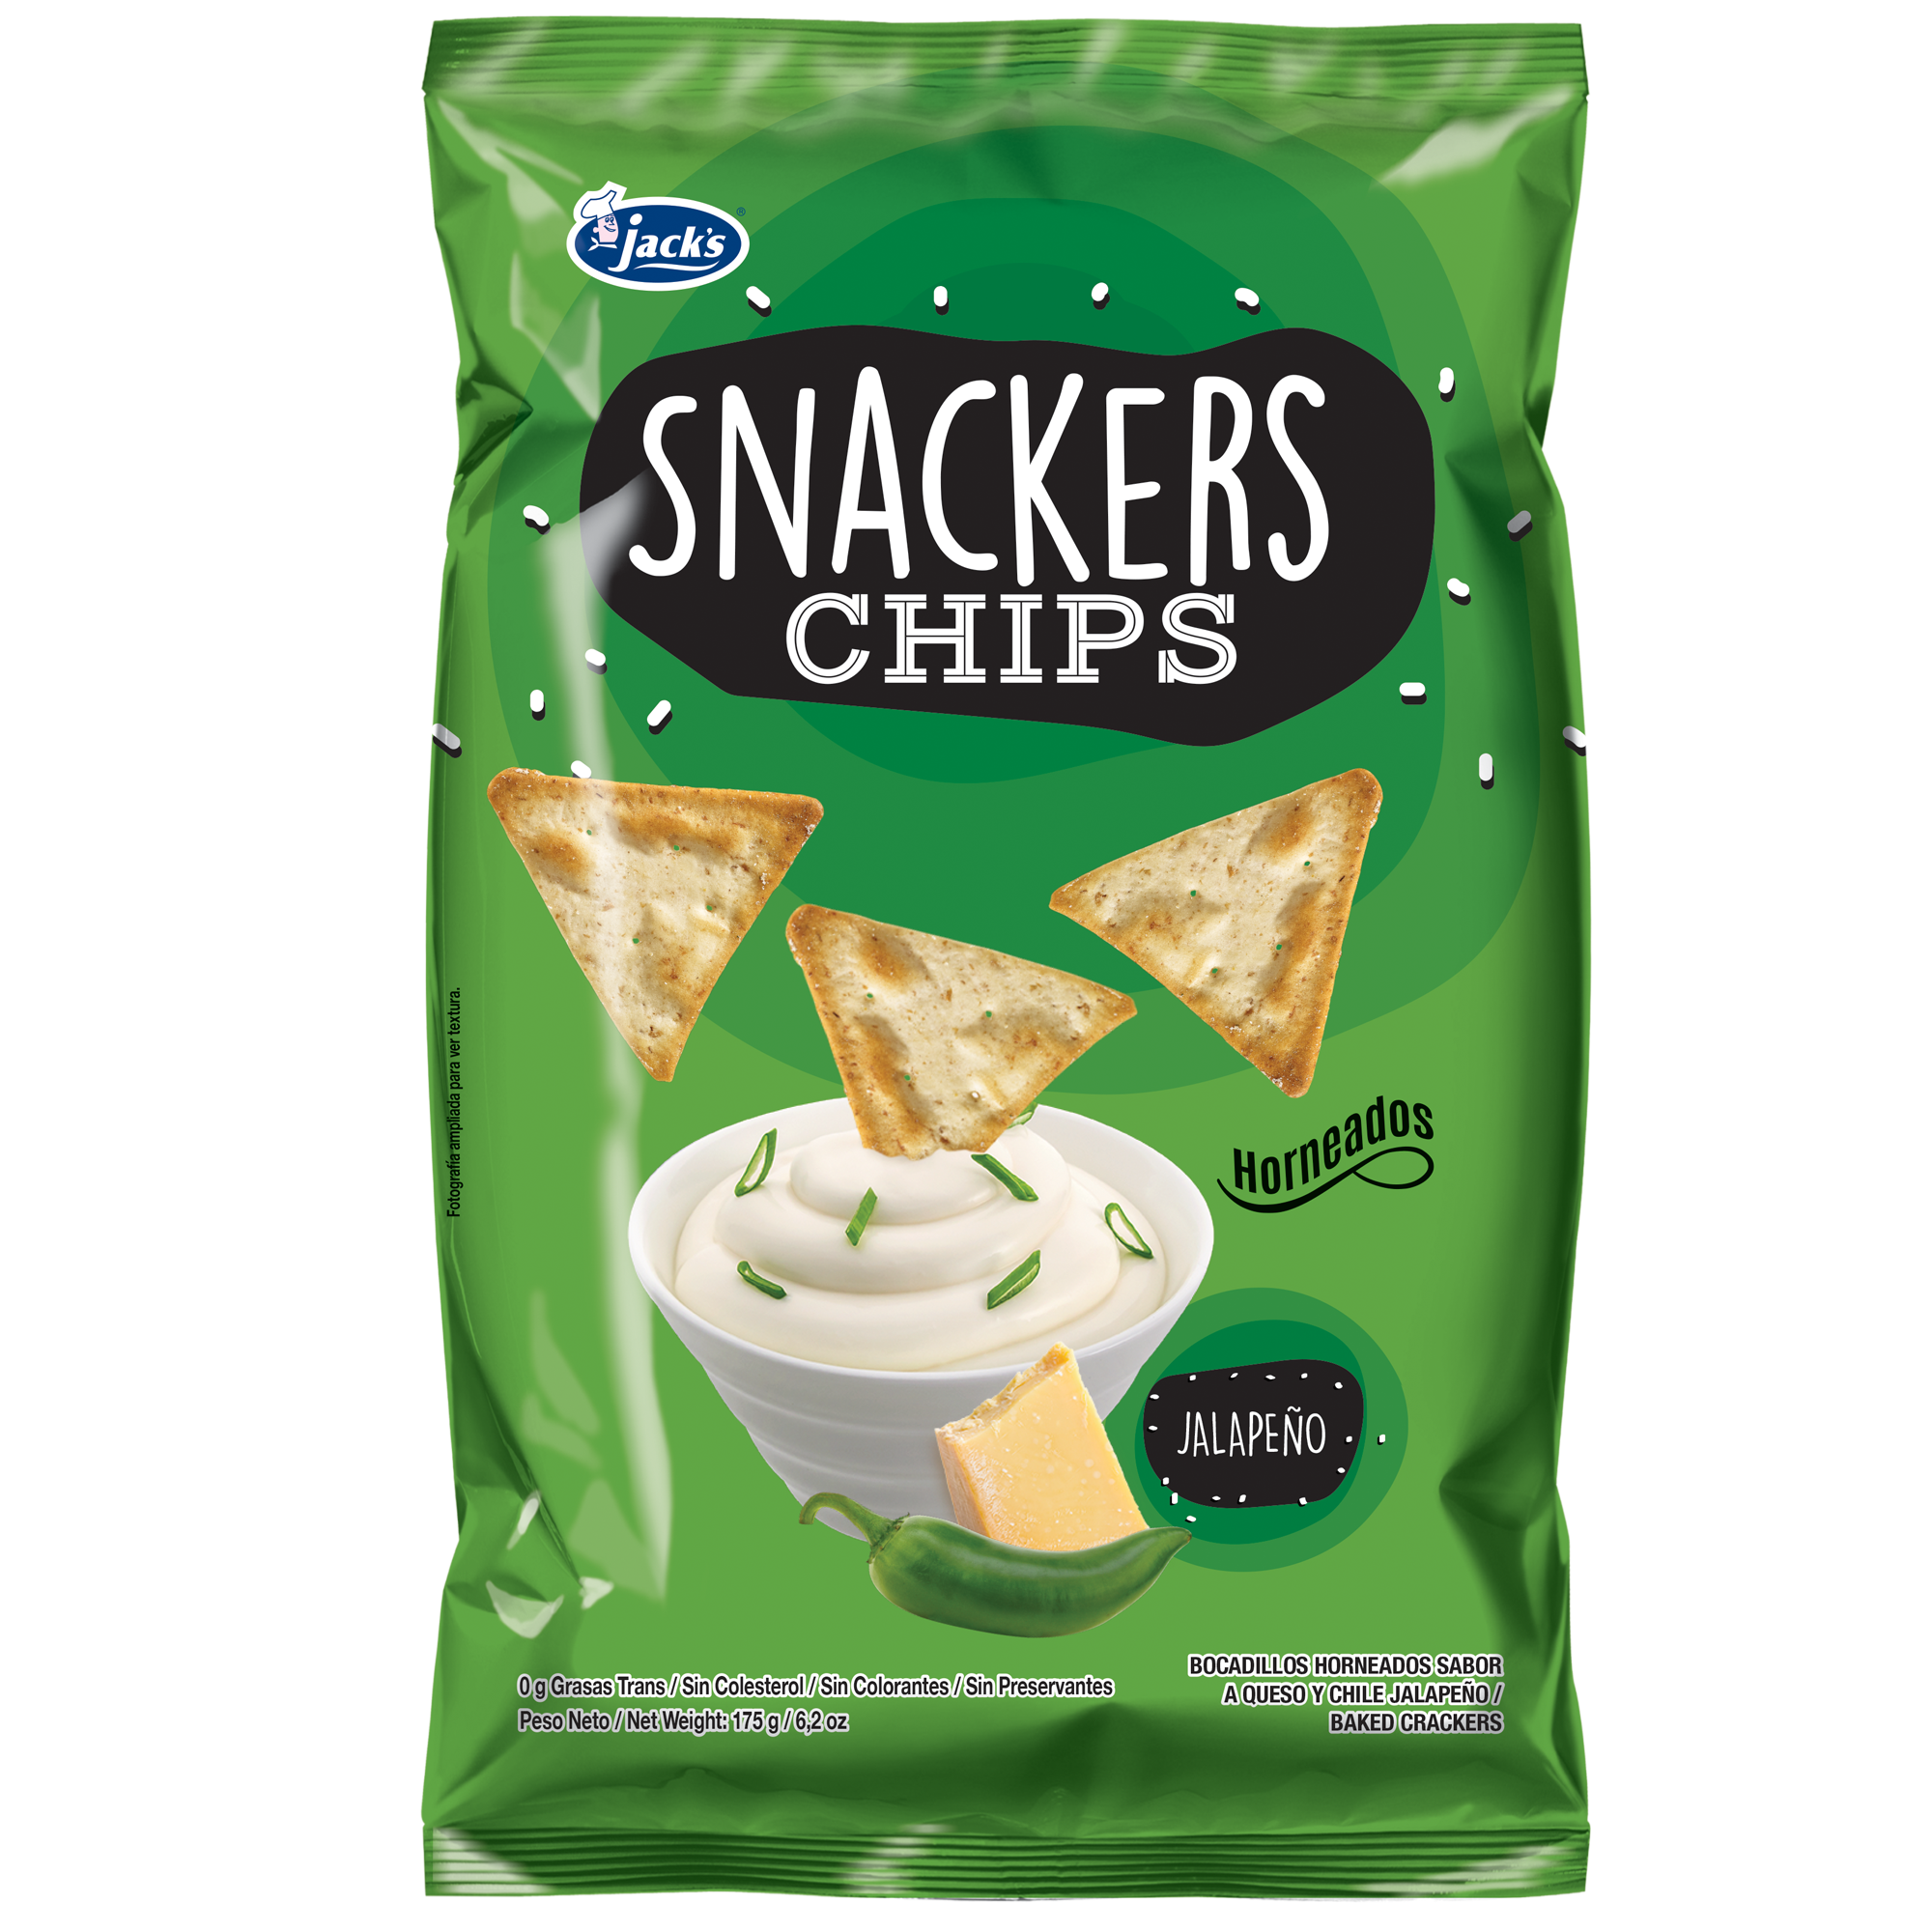 SNACKERS-CHIPS-JALAPENO-indiv-2000x2000-pag-web